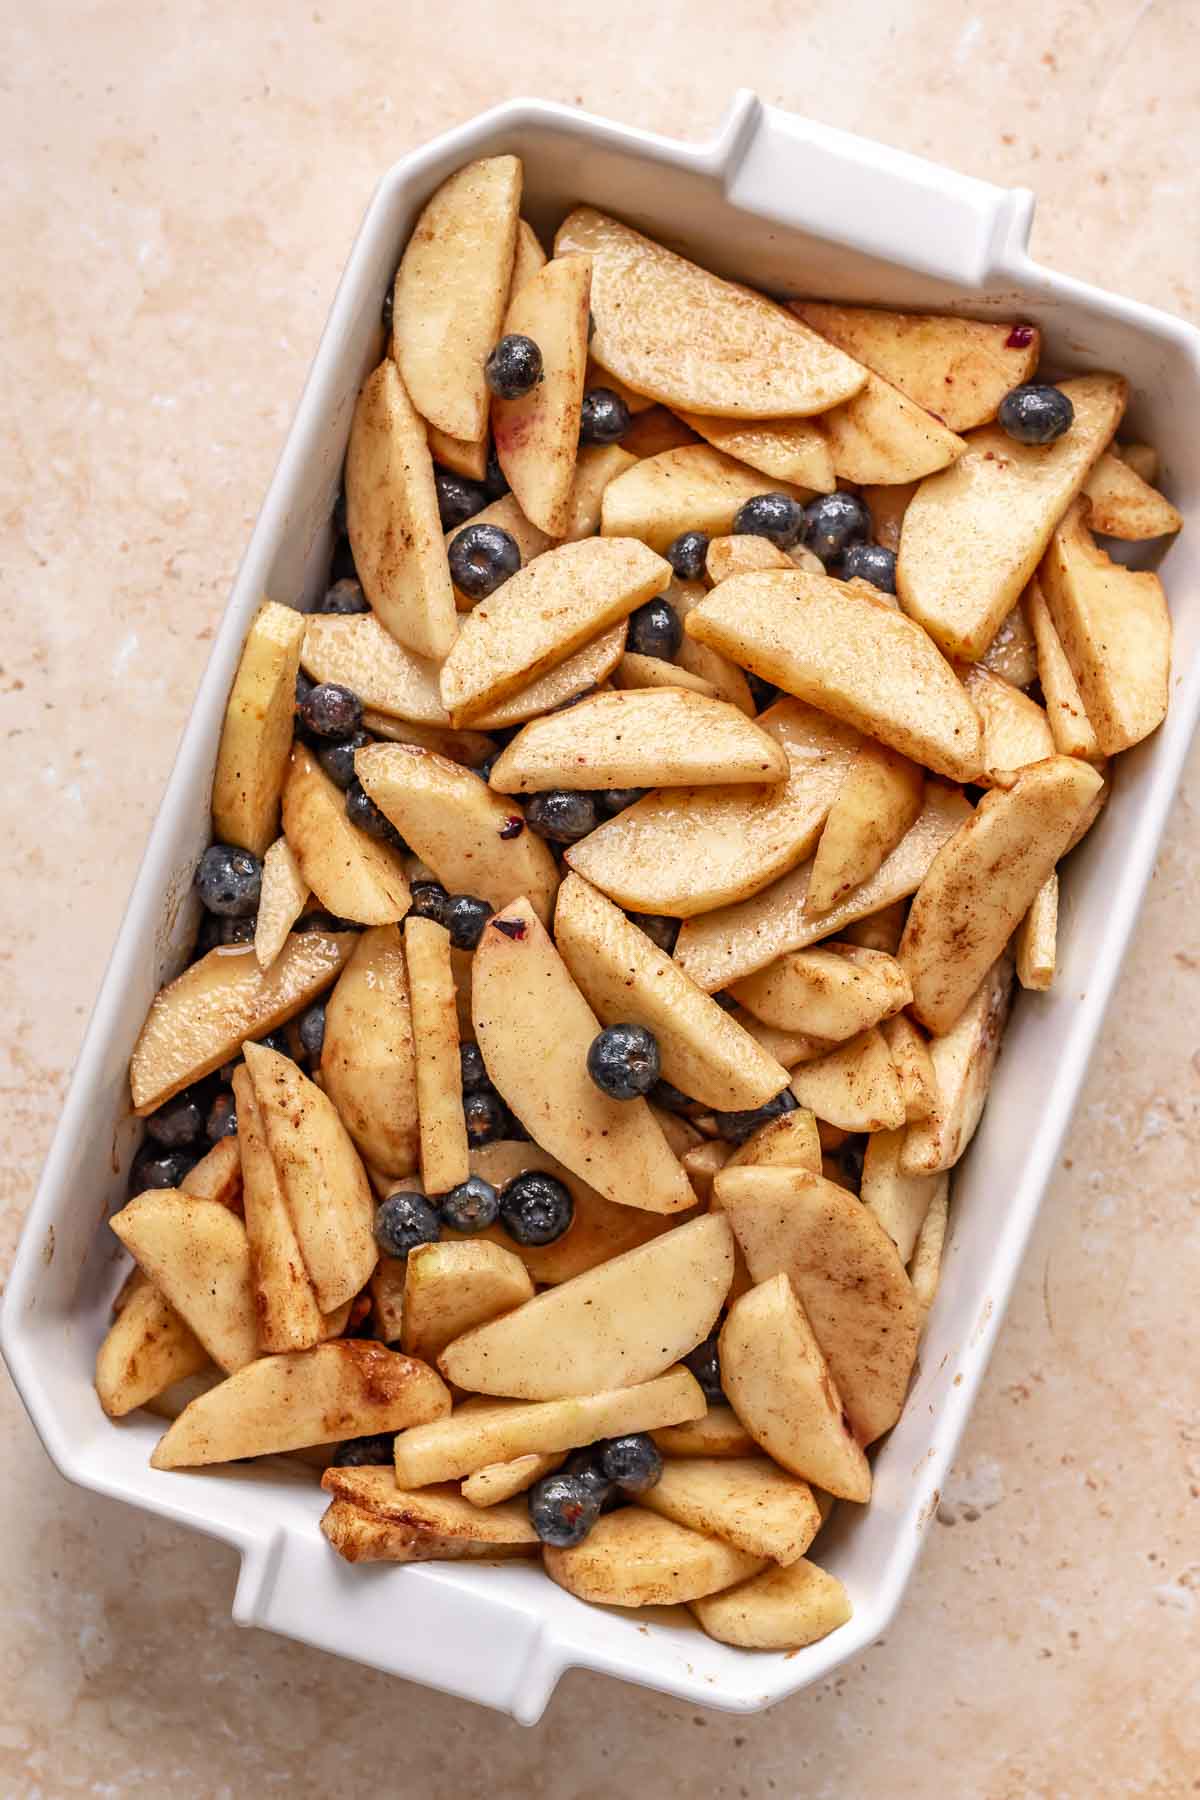 Apples and blueberries with spices in a casserole dish.